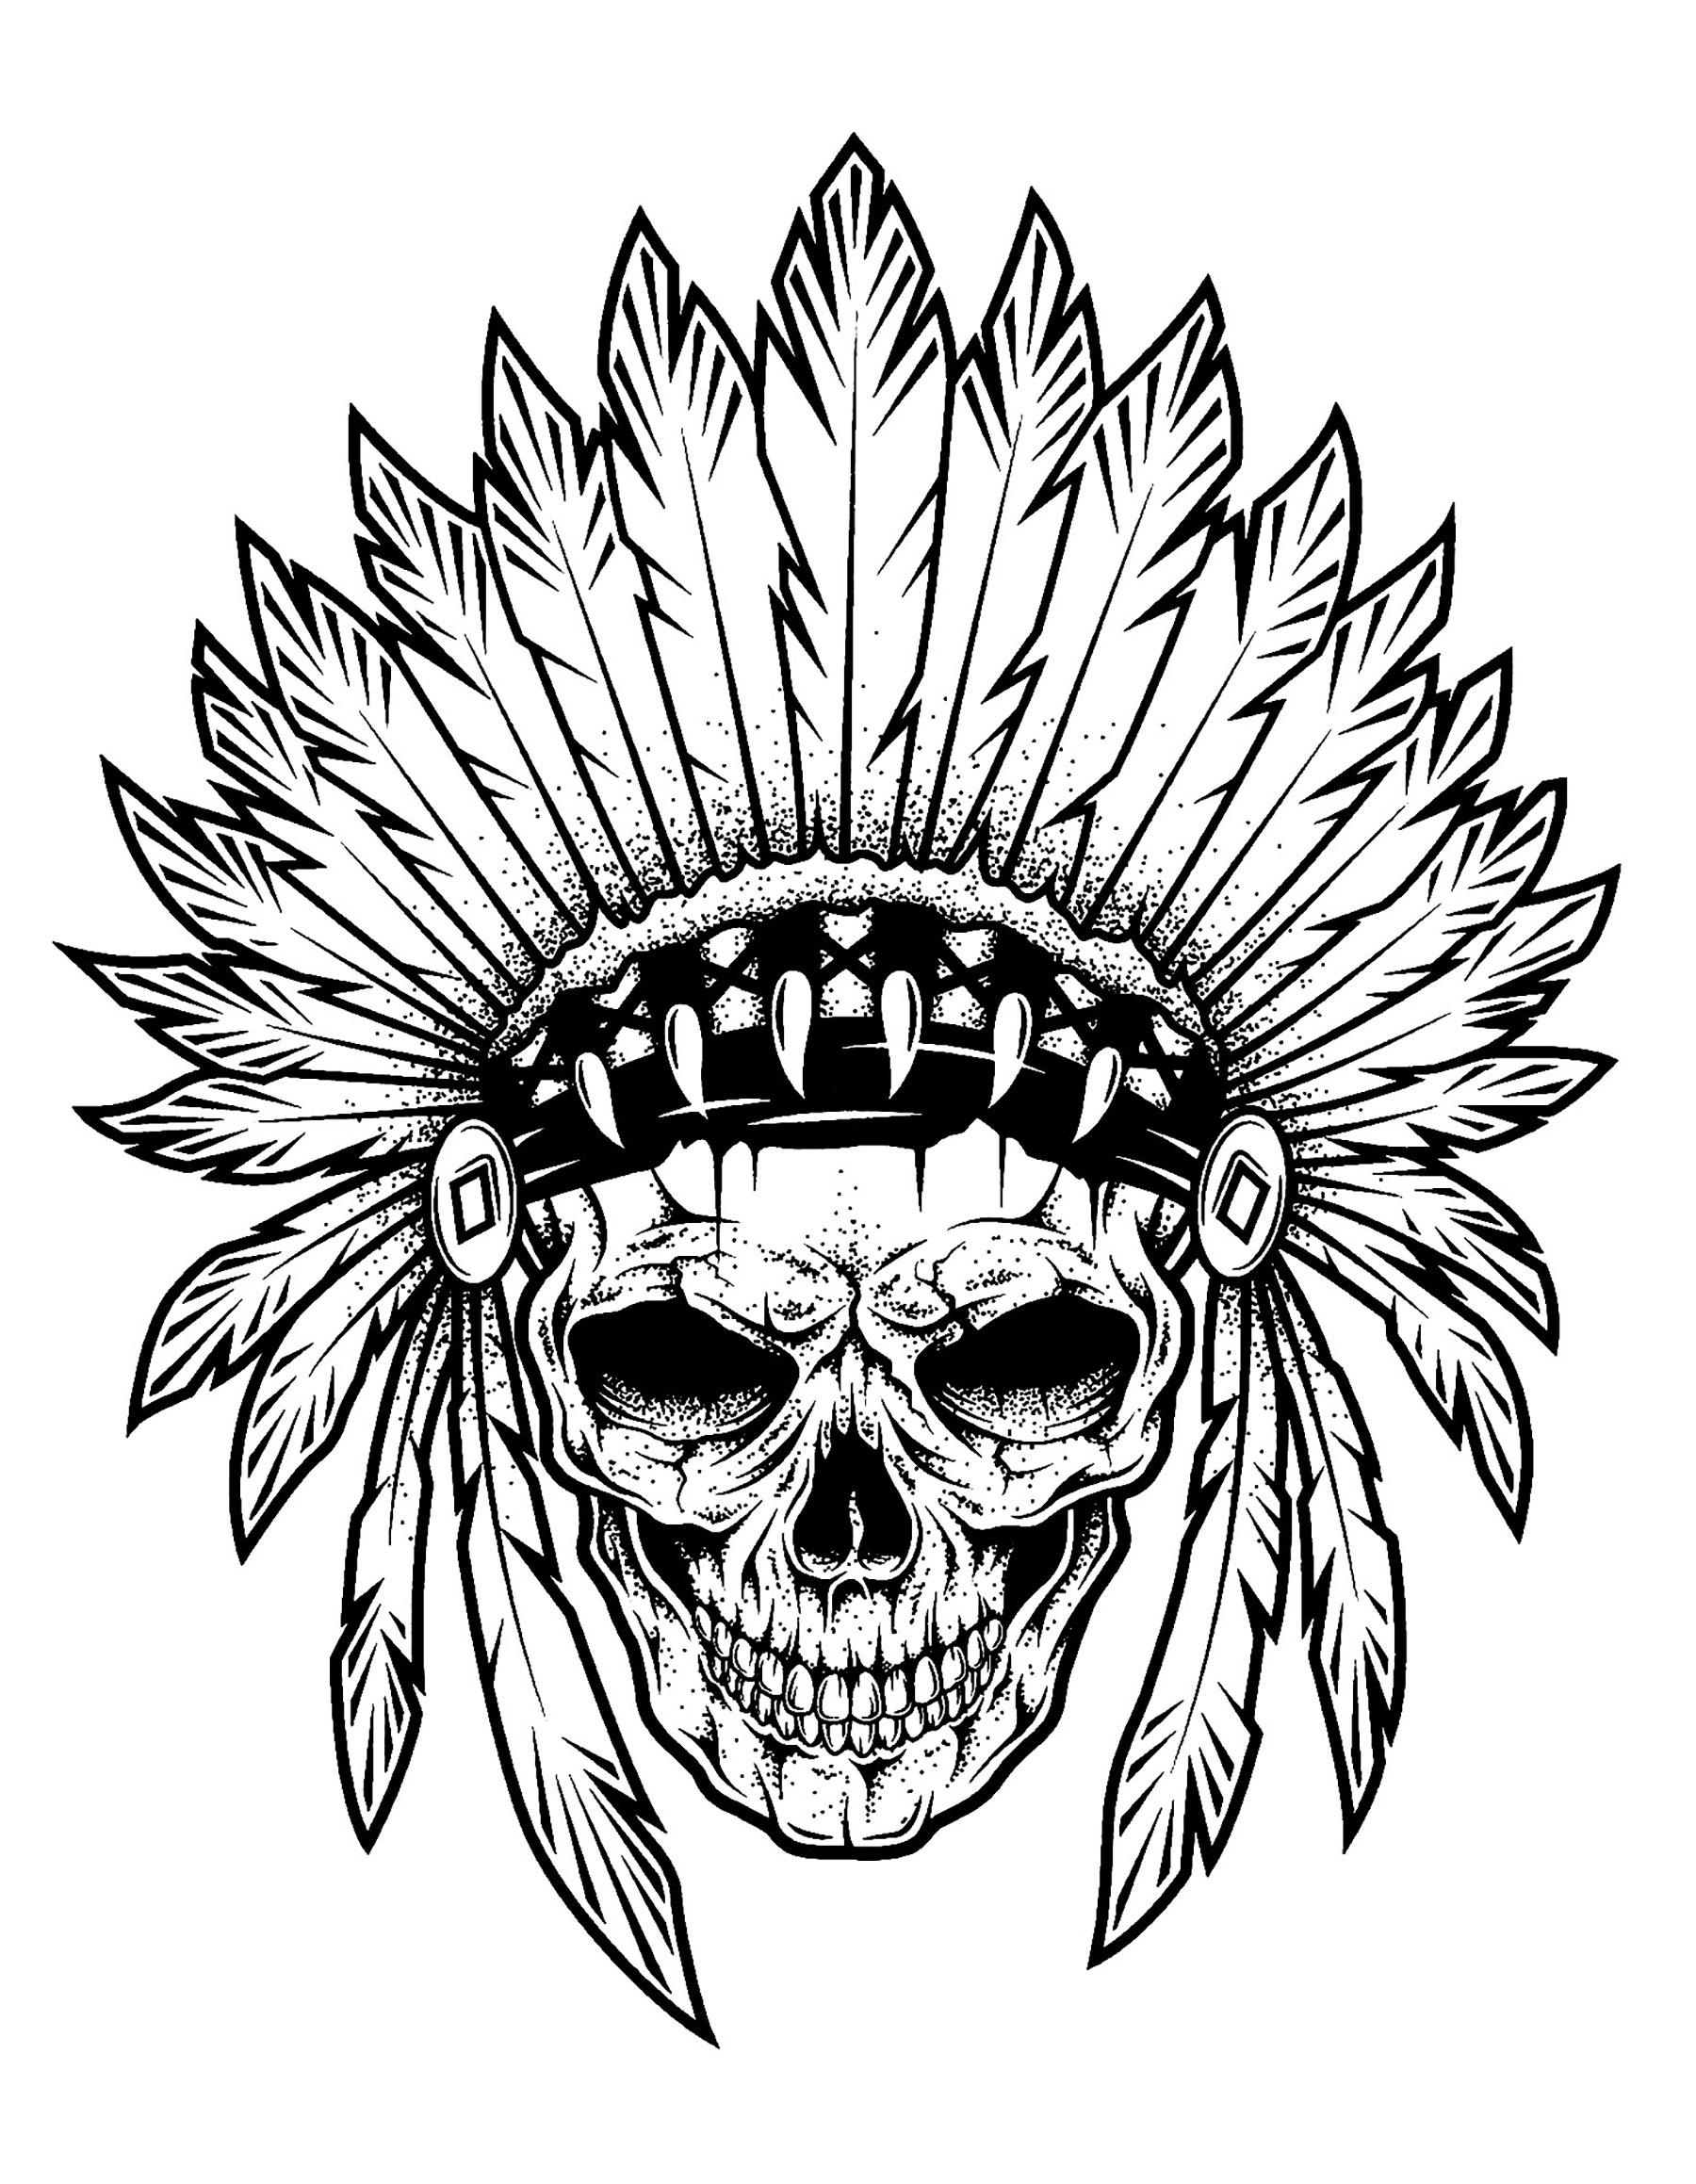 Download Tattoo indian chief skull - Tattoos Adult Coloring Pages